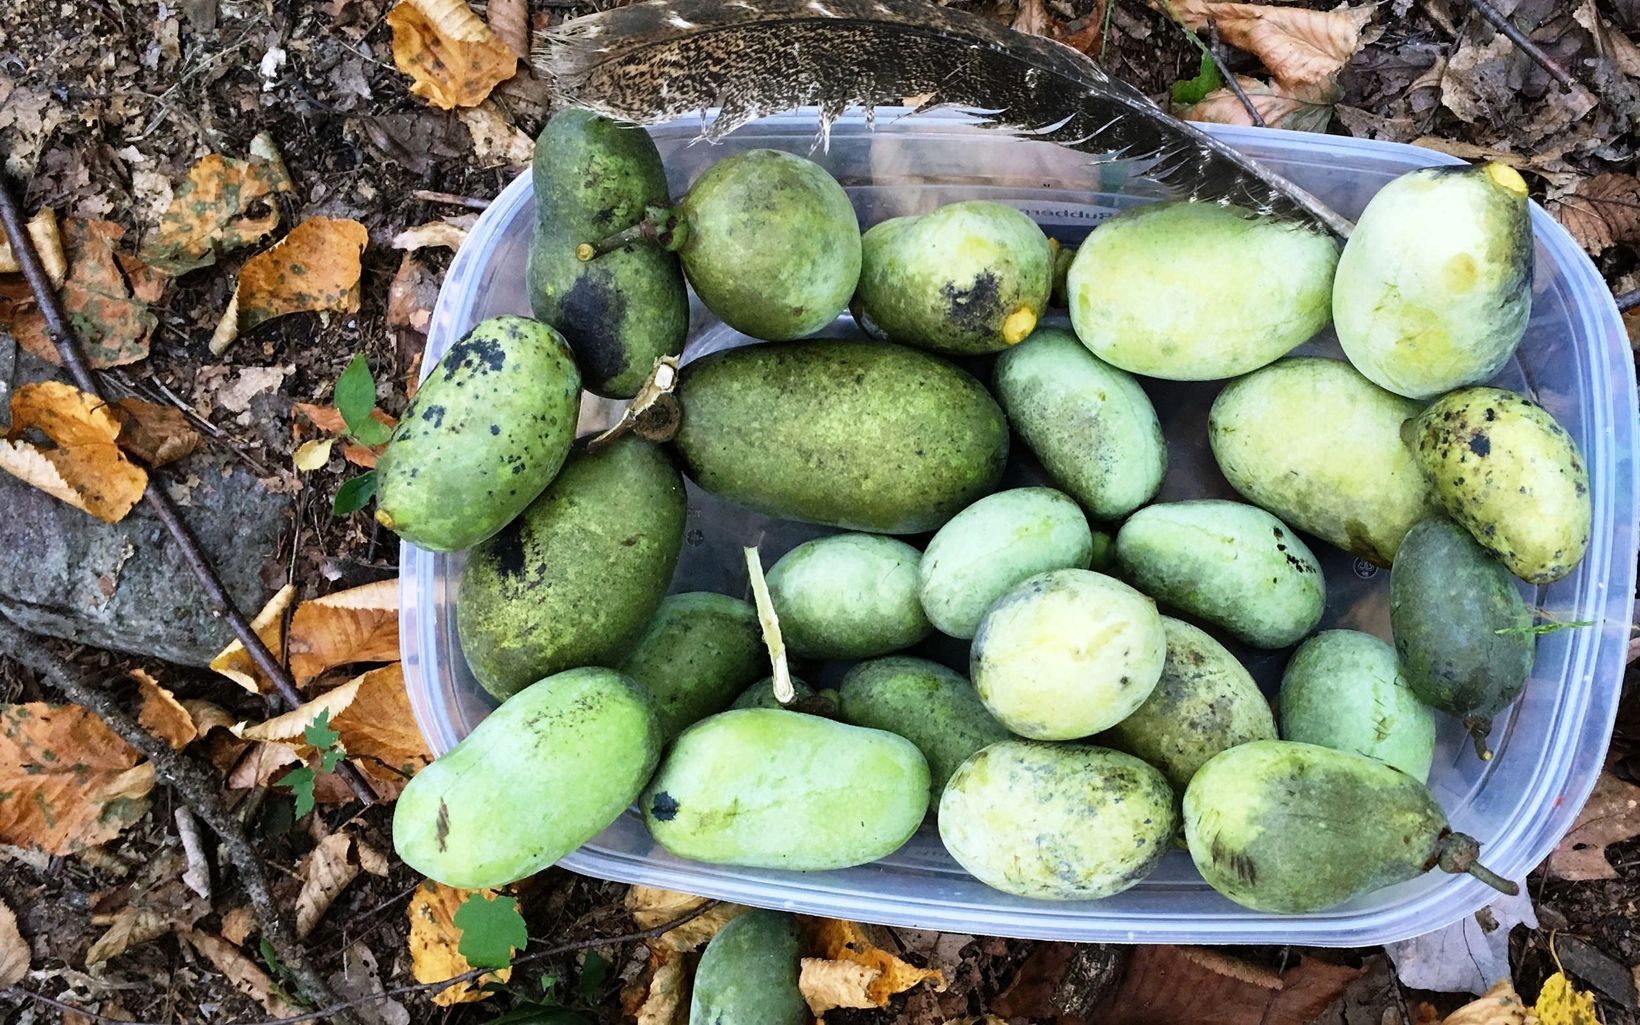 Paw Paw Fruit Bin of paw paw fruit collected at the Hamer Woodlands at Cove Mountain. © Trish Newdeck